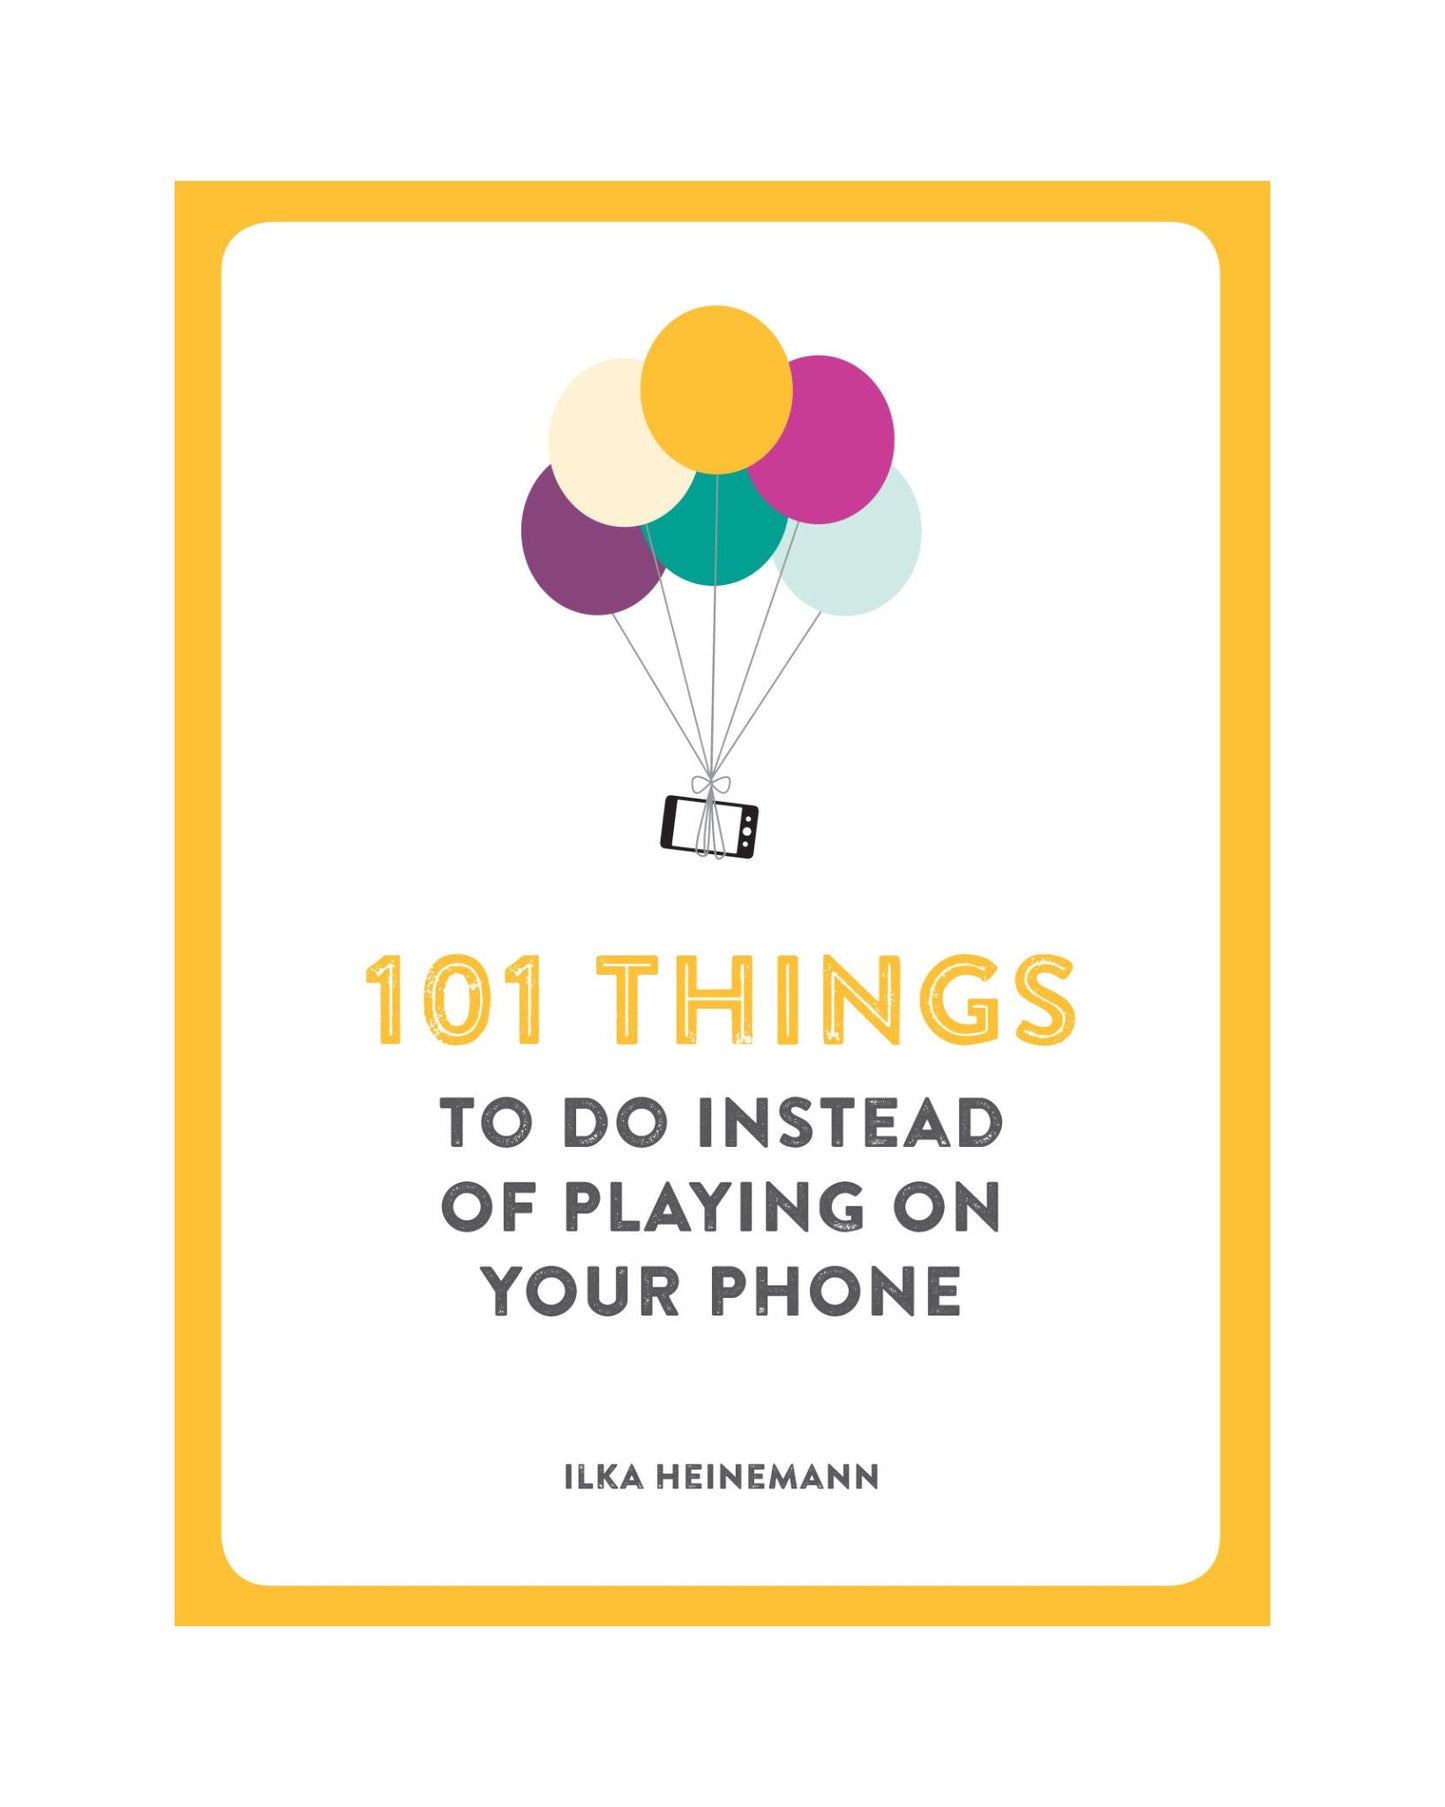 101 Things To Do Instead of Playing on Your Phone